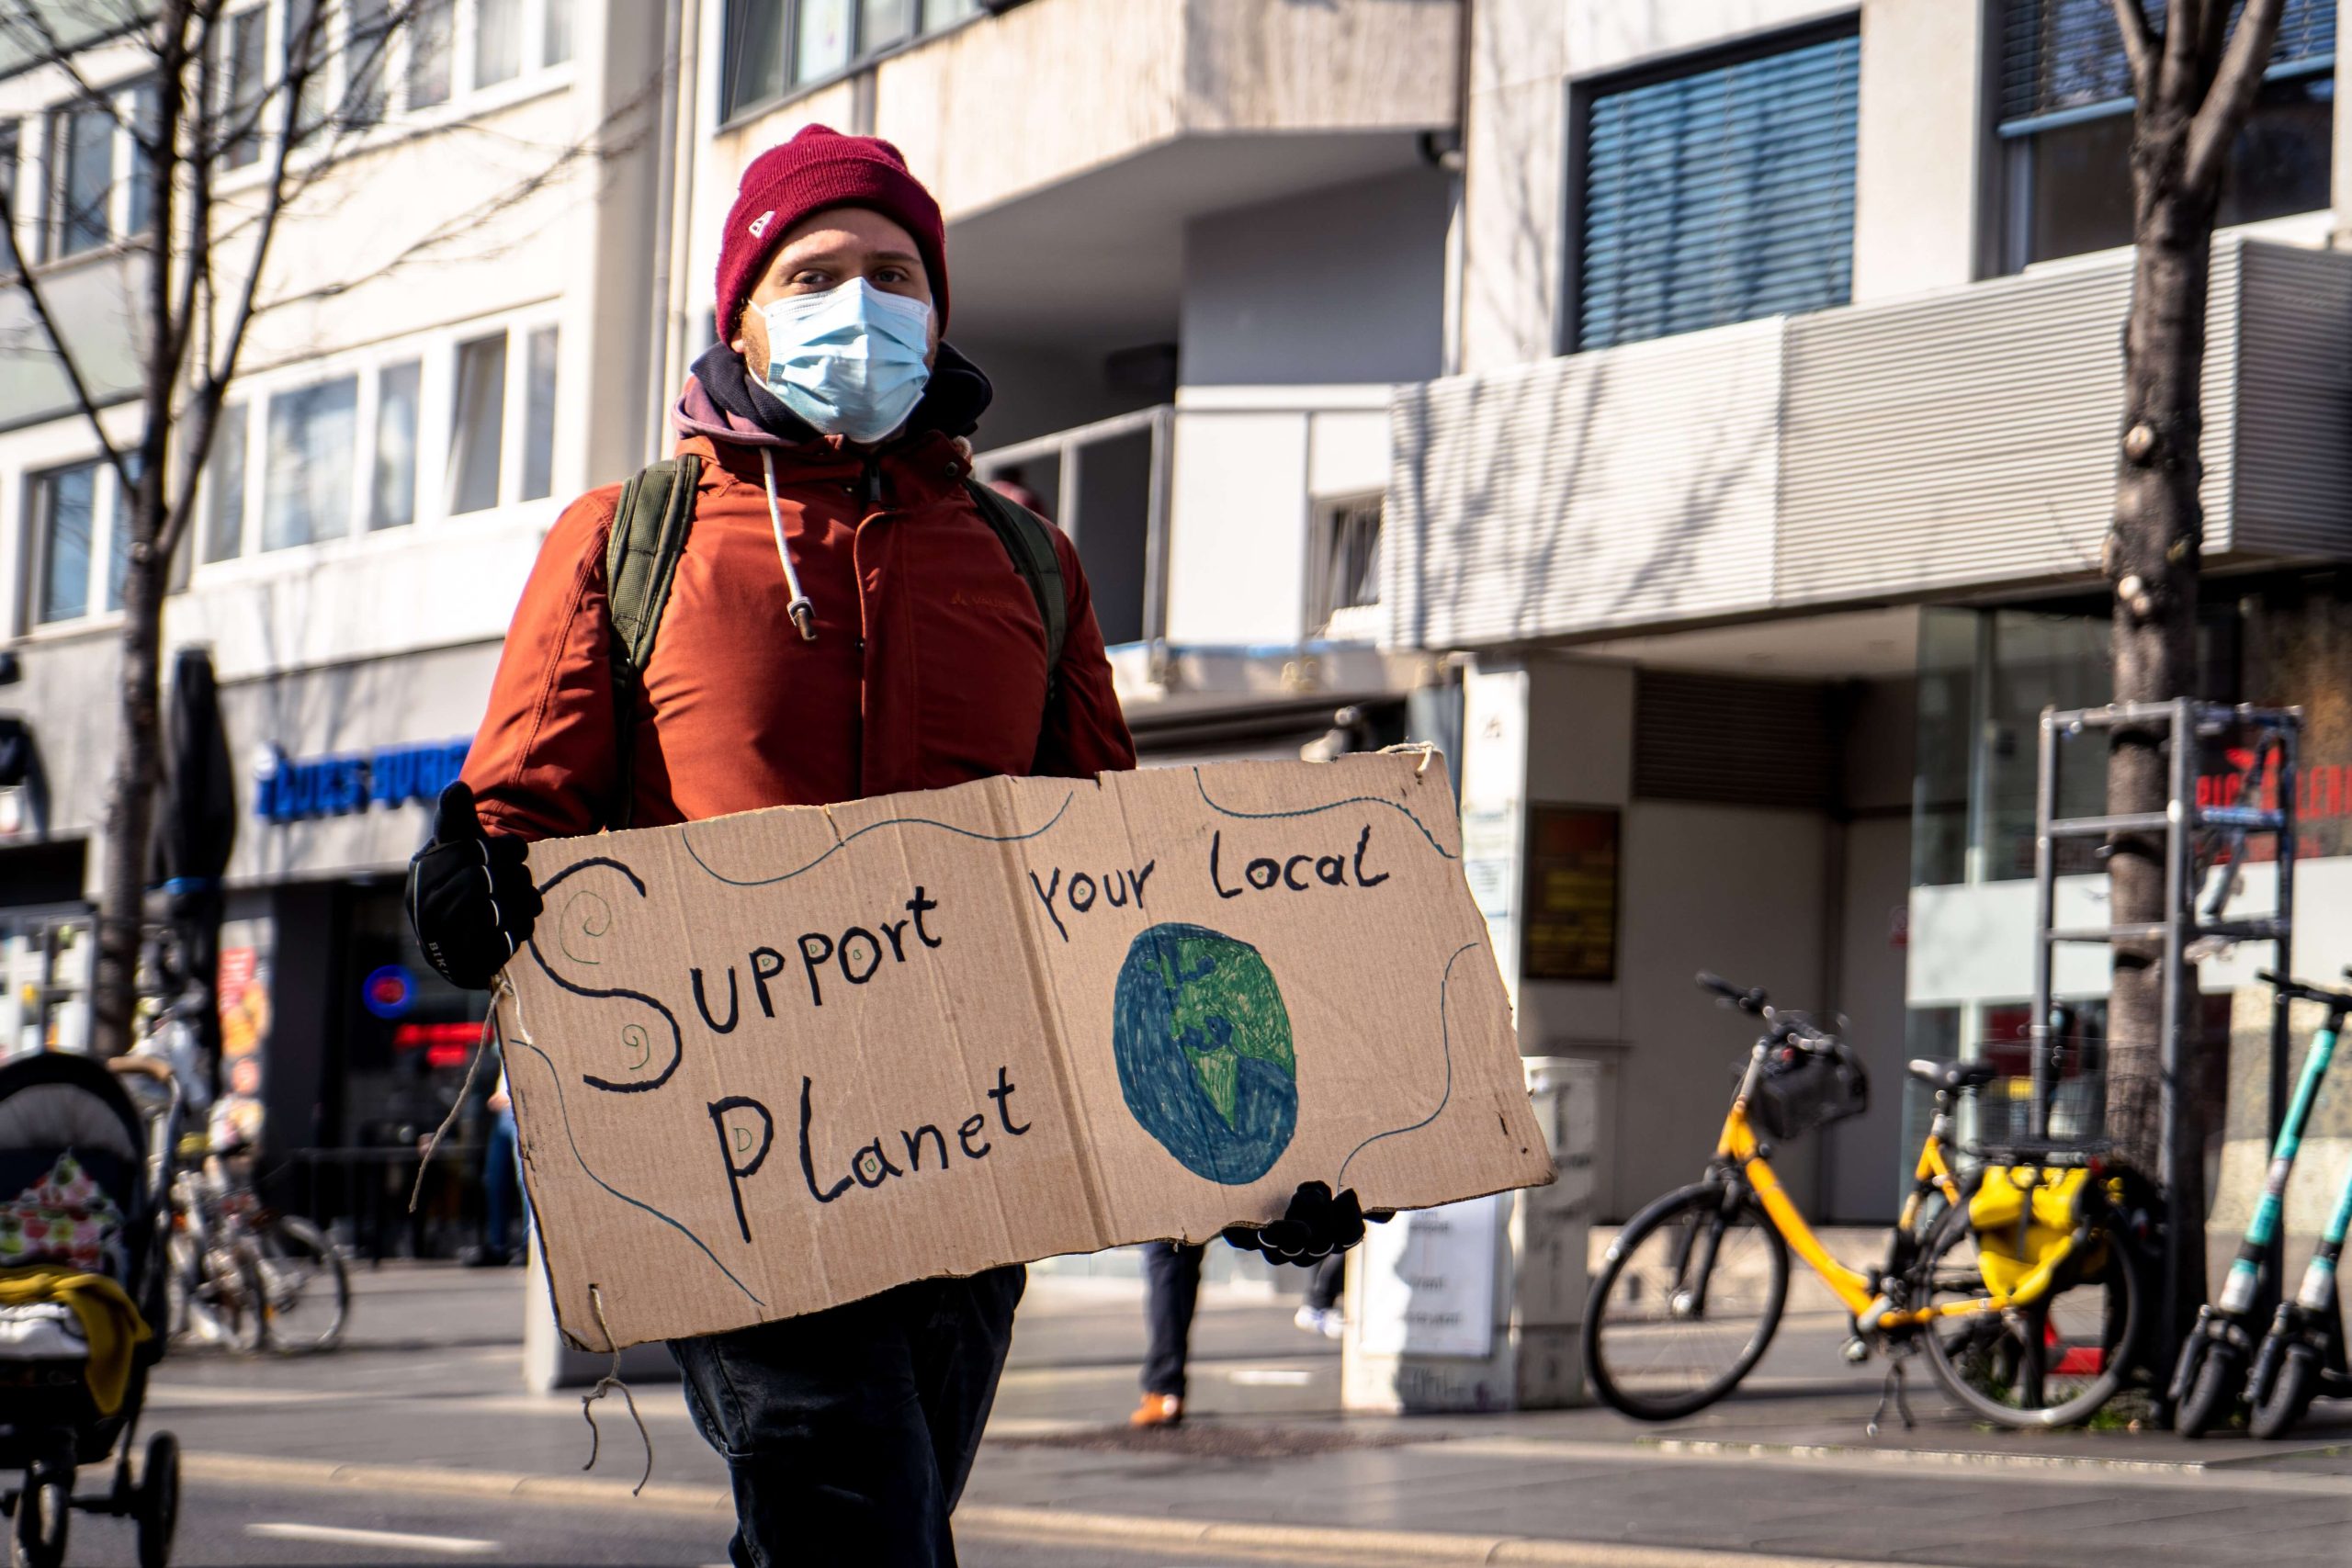 A person wearing a mask and holding a sign that says "support your local planet"